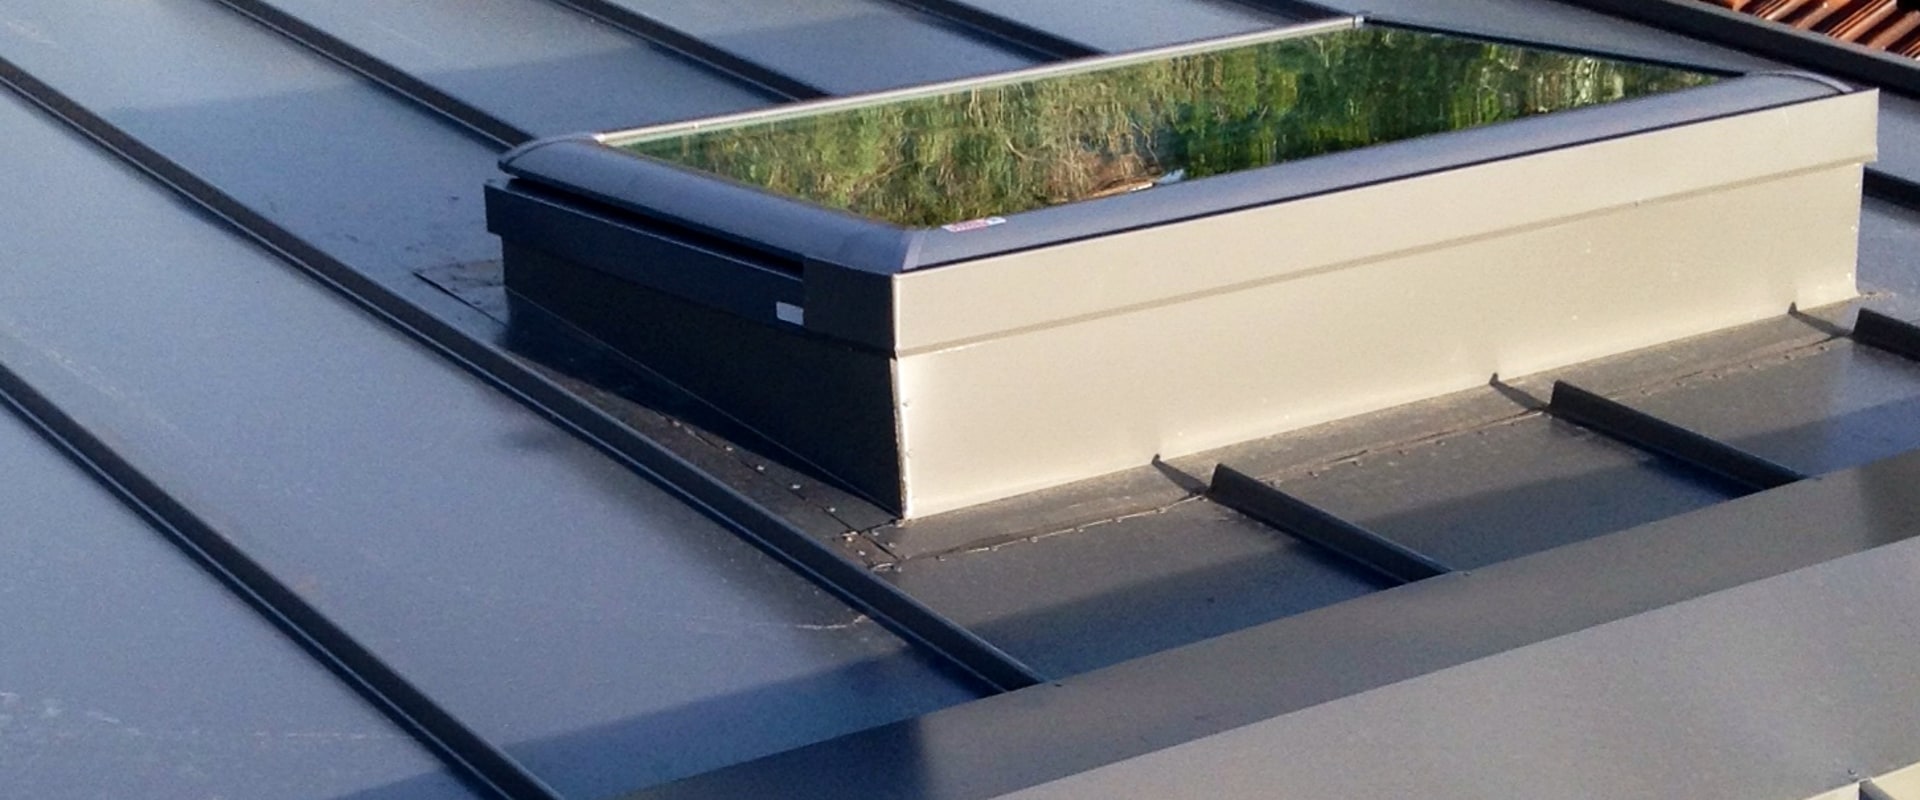 Installing a Skylight on Your Roof: What You Need to Know